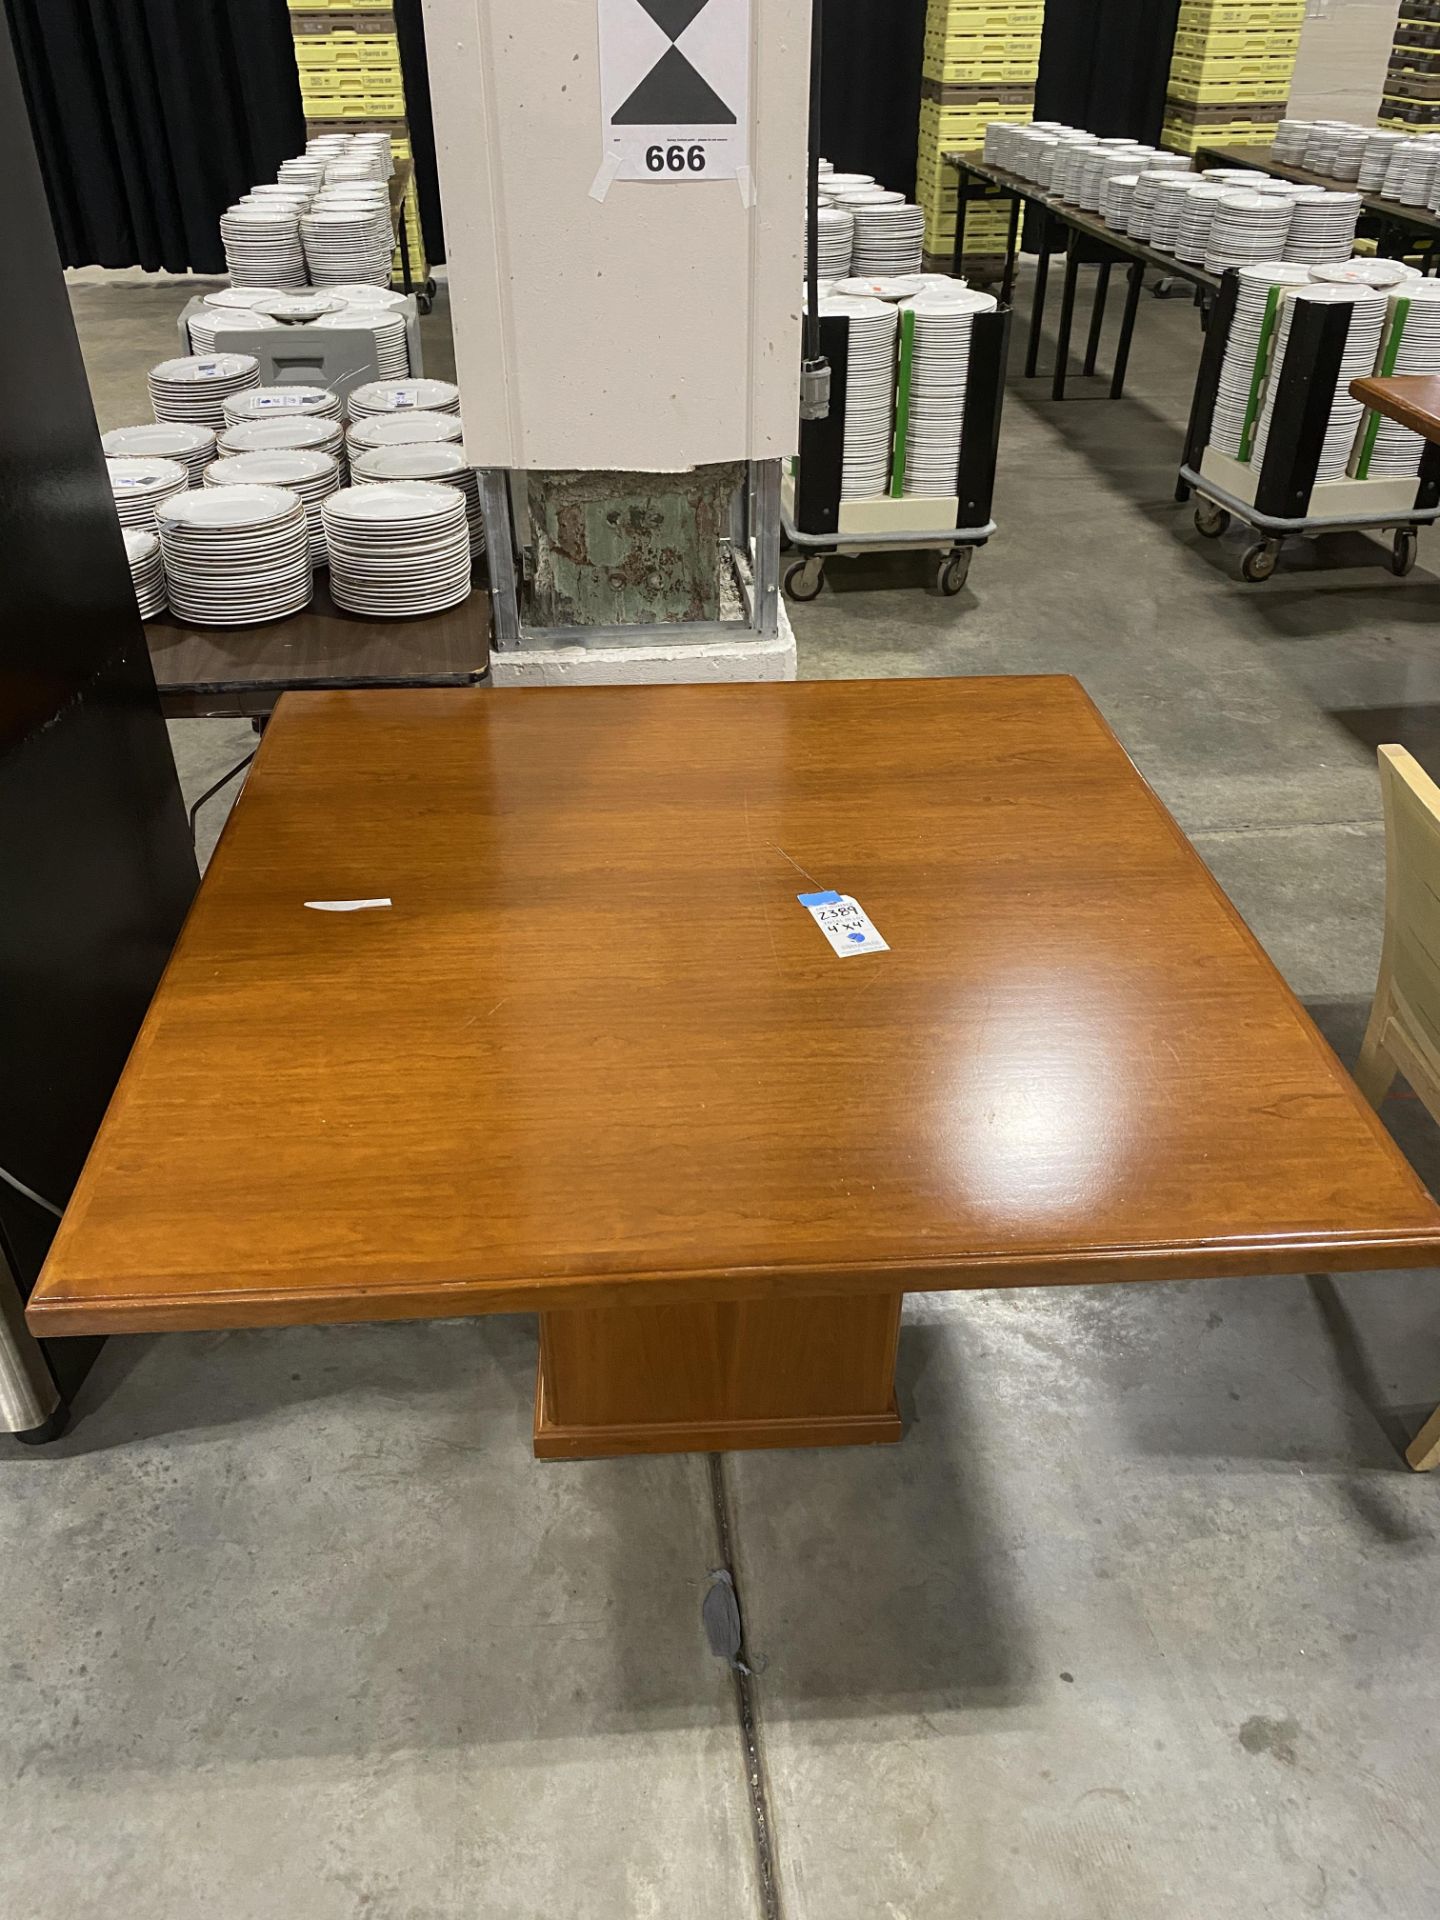 (2 Pieces) c/o: 8' x 4' Double Wood Pedestal Wood Top Conference Table & 4' x 4' Square All Wood